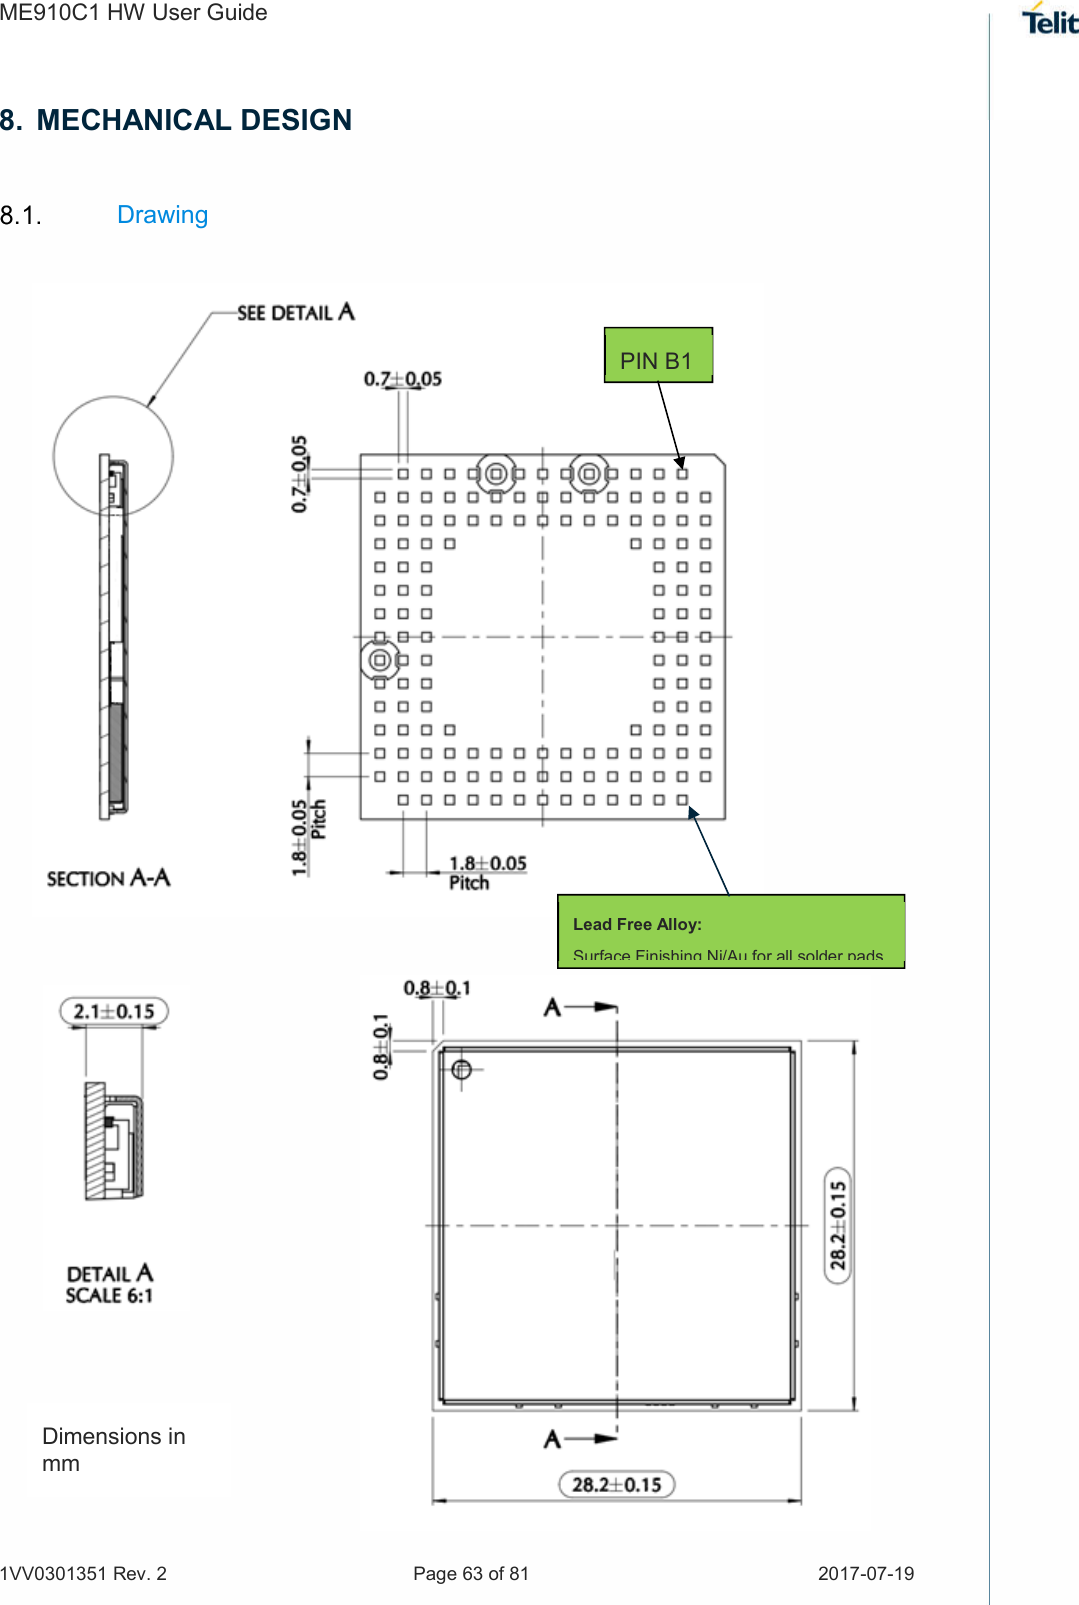 ME910C1 HW User Guide 1VV0301351 Rev. 2  Page 63 of 81  2017-07-19  8.  MECHANICAL DESIGN   Drawing    Dimensions in mm PIN B1 Lead Free Alloy: Surface Finishing Ni/Au for all solder pads 